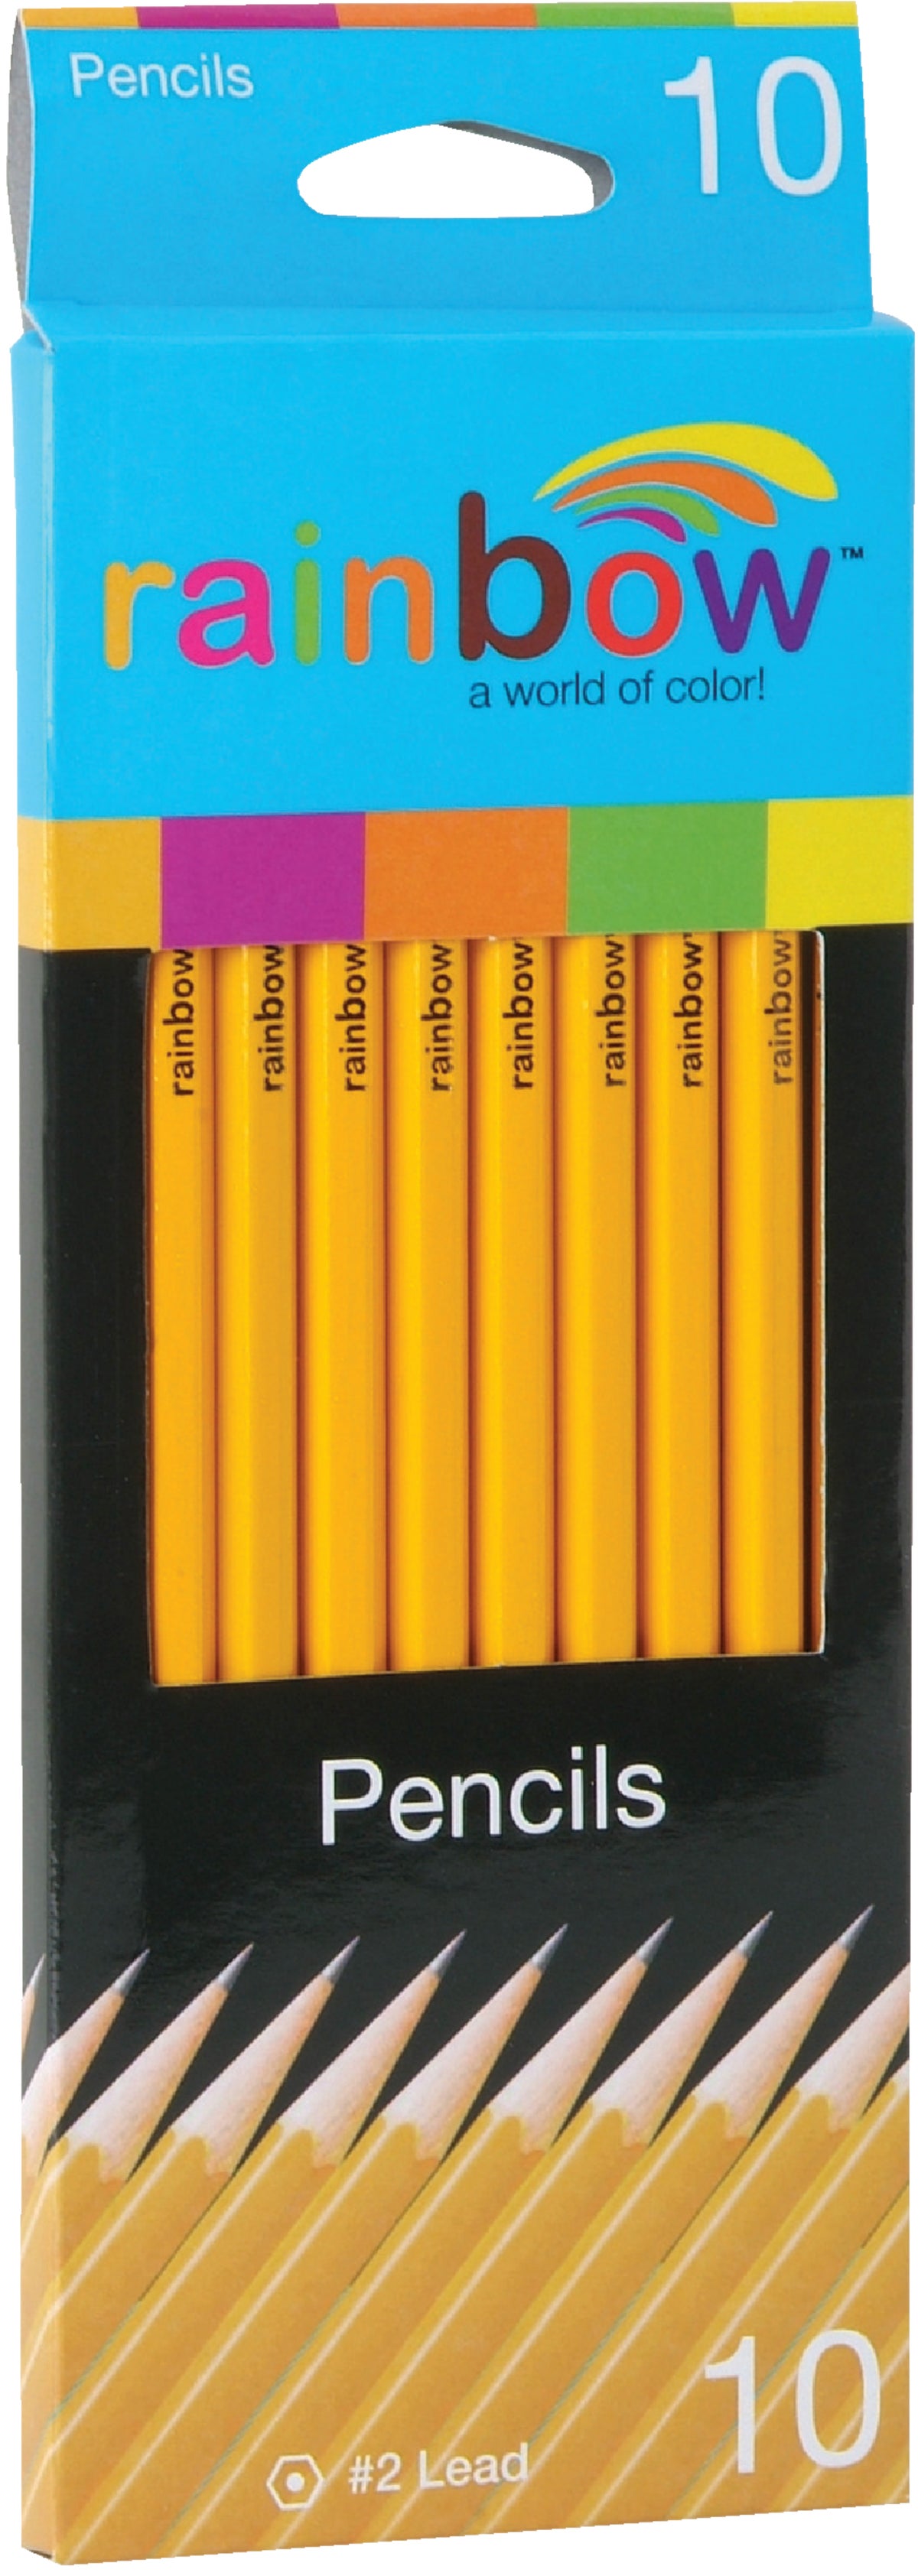 1 pack of 10 Pencils Yellow 2 Yellow Pencils with Erasers iScholar No 33310 